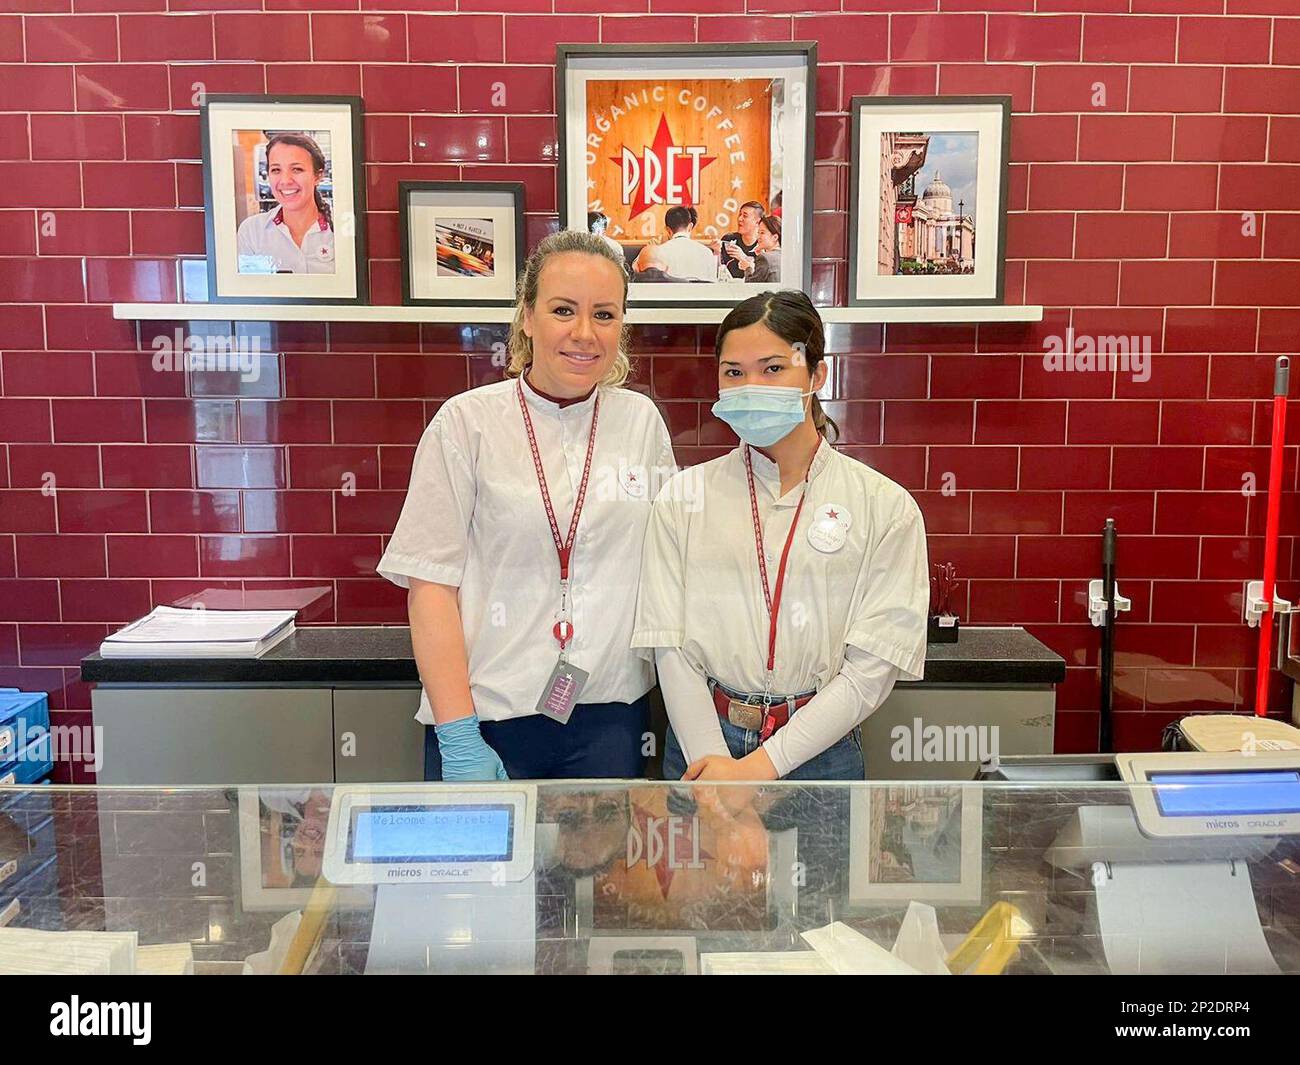 Pret A Manger employees get to choose whether they get to keep their masks on or not. (Left: Caroline Fronza. Right: Josua Repollo), on the first day of the city's mask mandate scrapped. 01MAR23 SCMP/Rachel Yeo Stock Photo